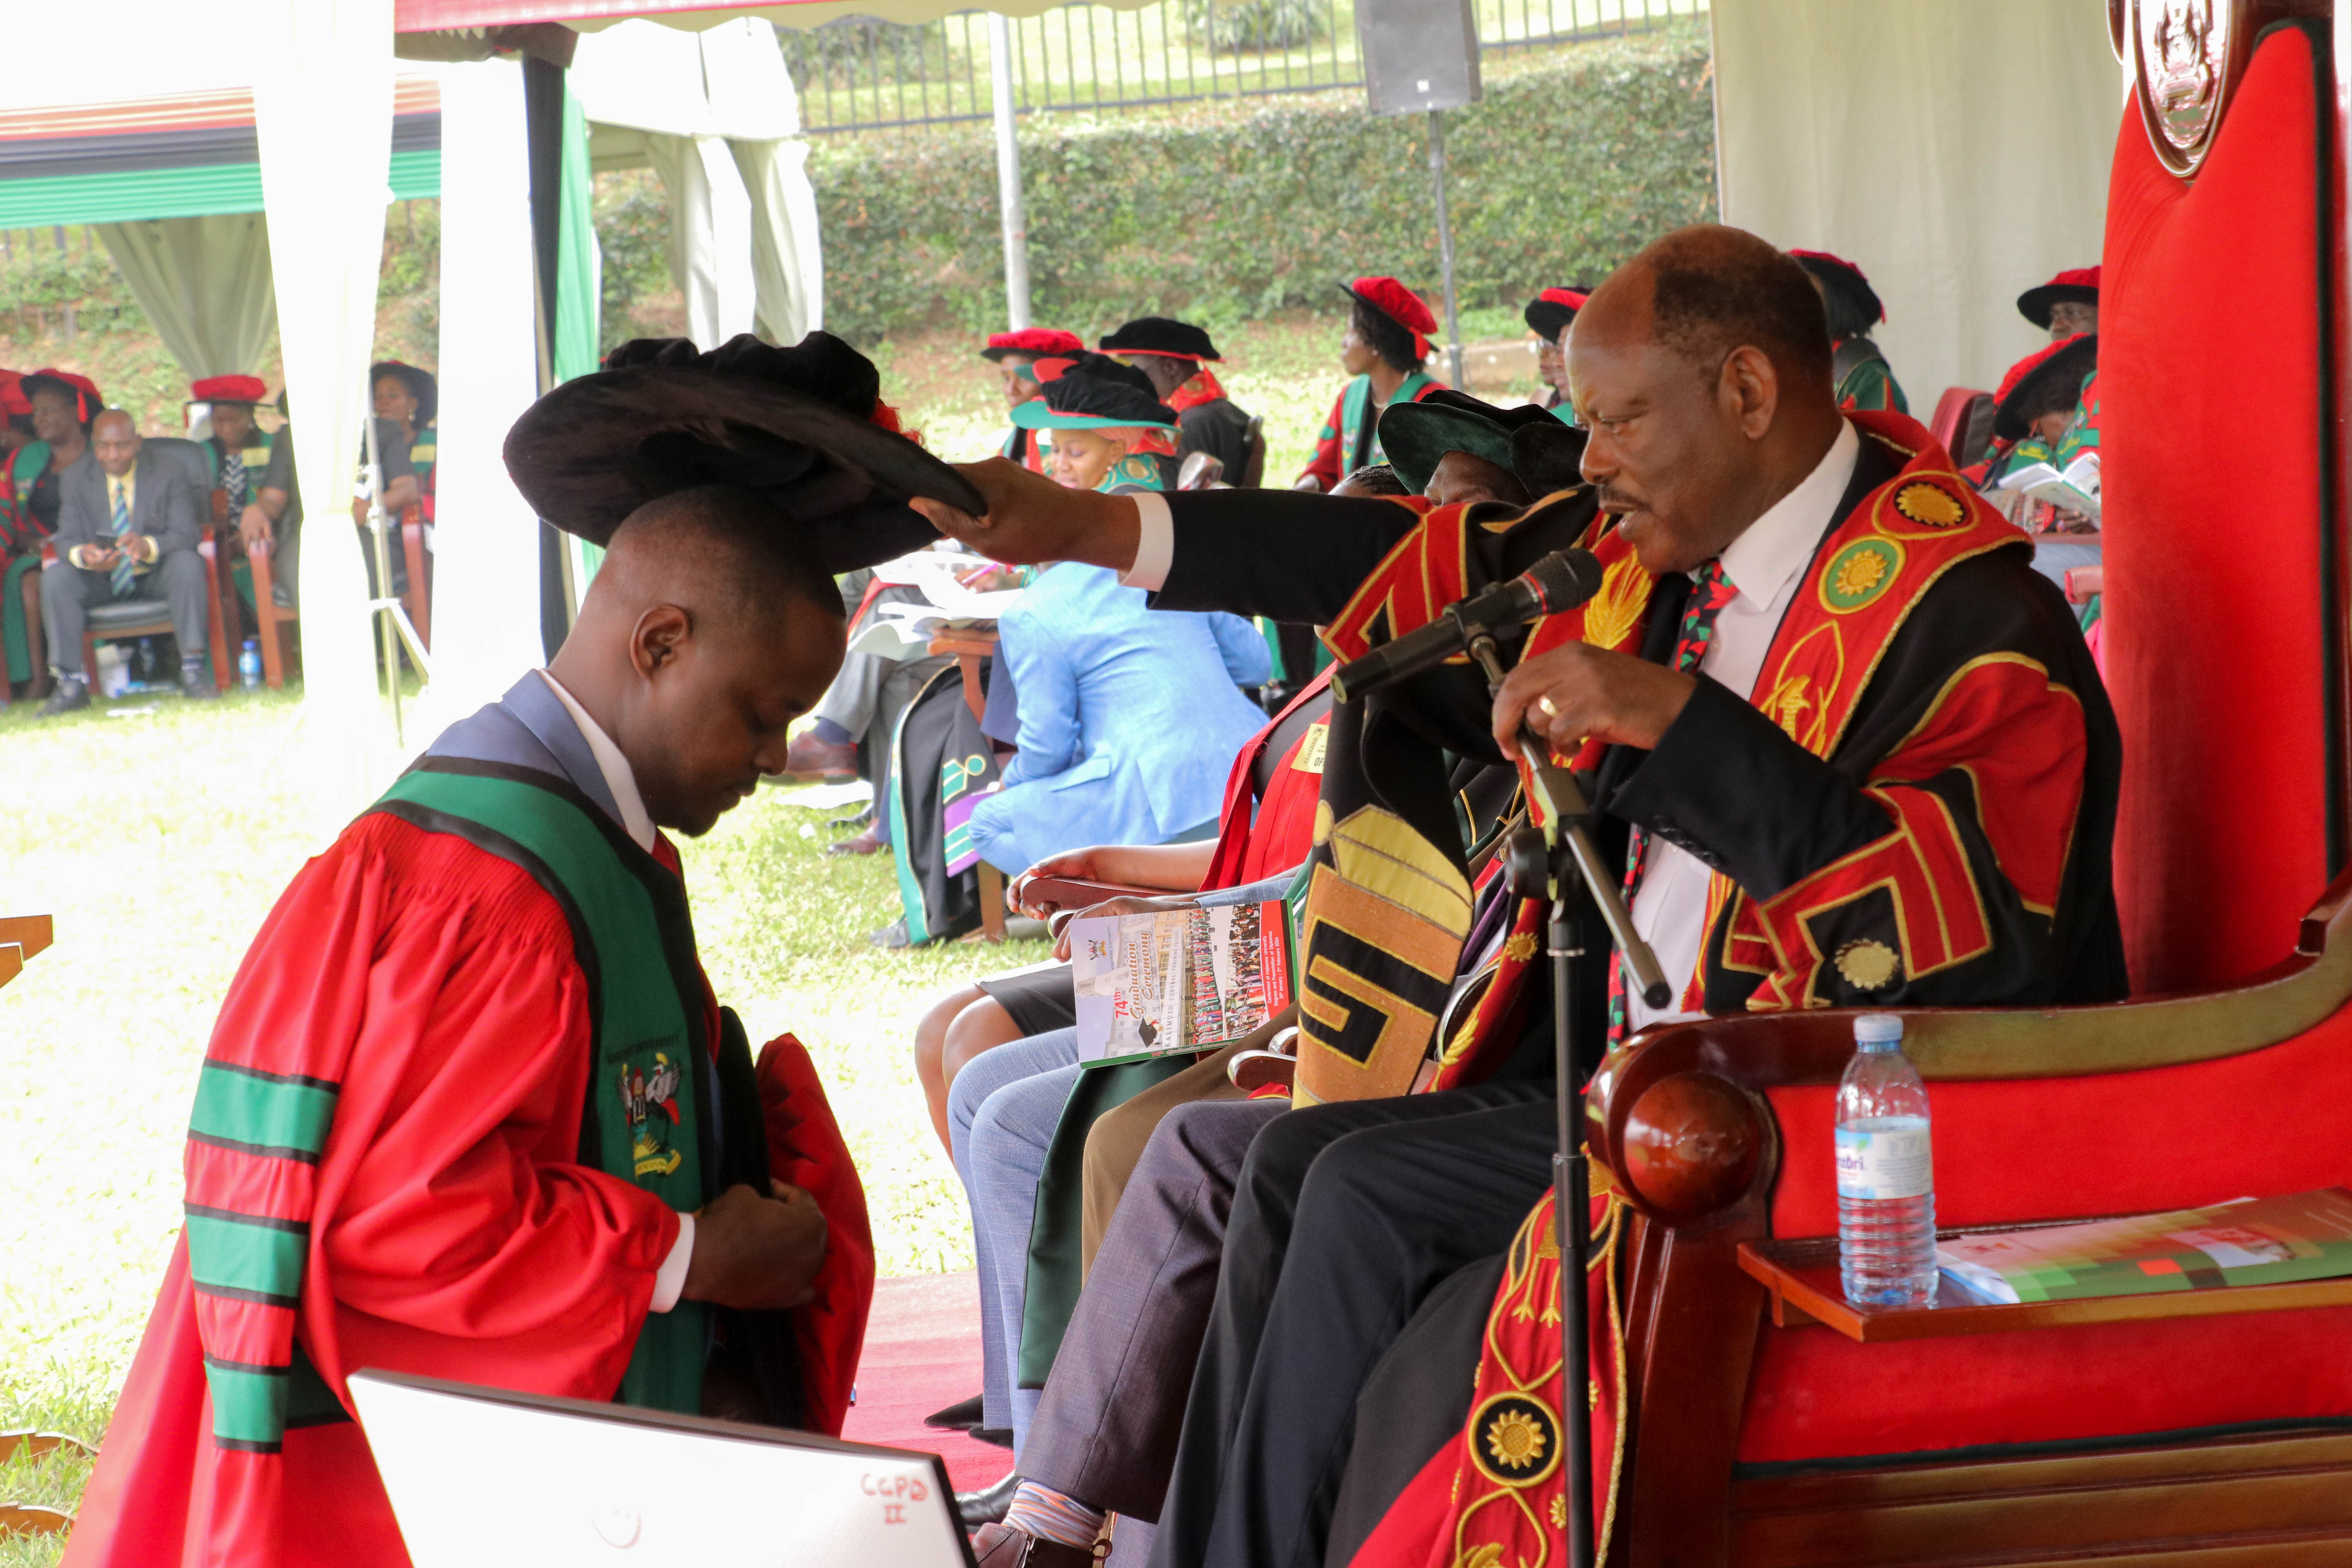 "By virtue of the authority entrusted in me, I confer up on you a degree of Doctor of Philosophy of Makerere University," these were exactly the words by the Chancellor as he conferred a PhD to Dr. Nicholas Nanyeeya